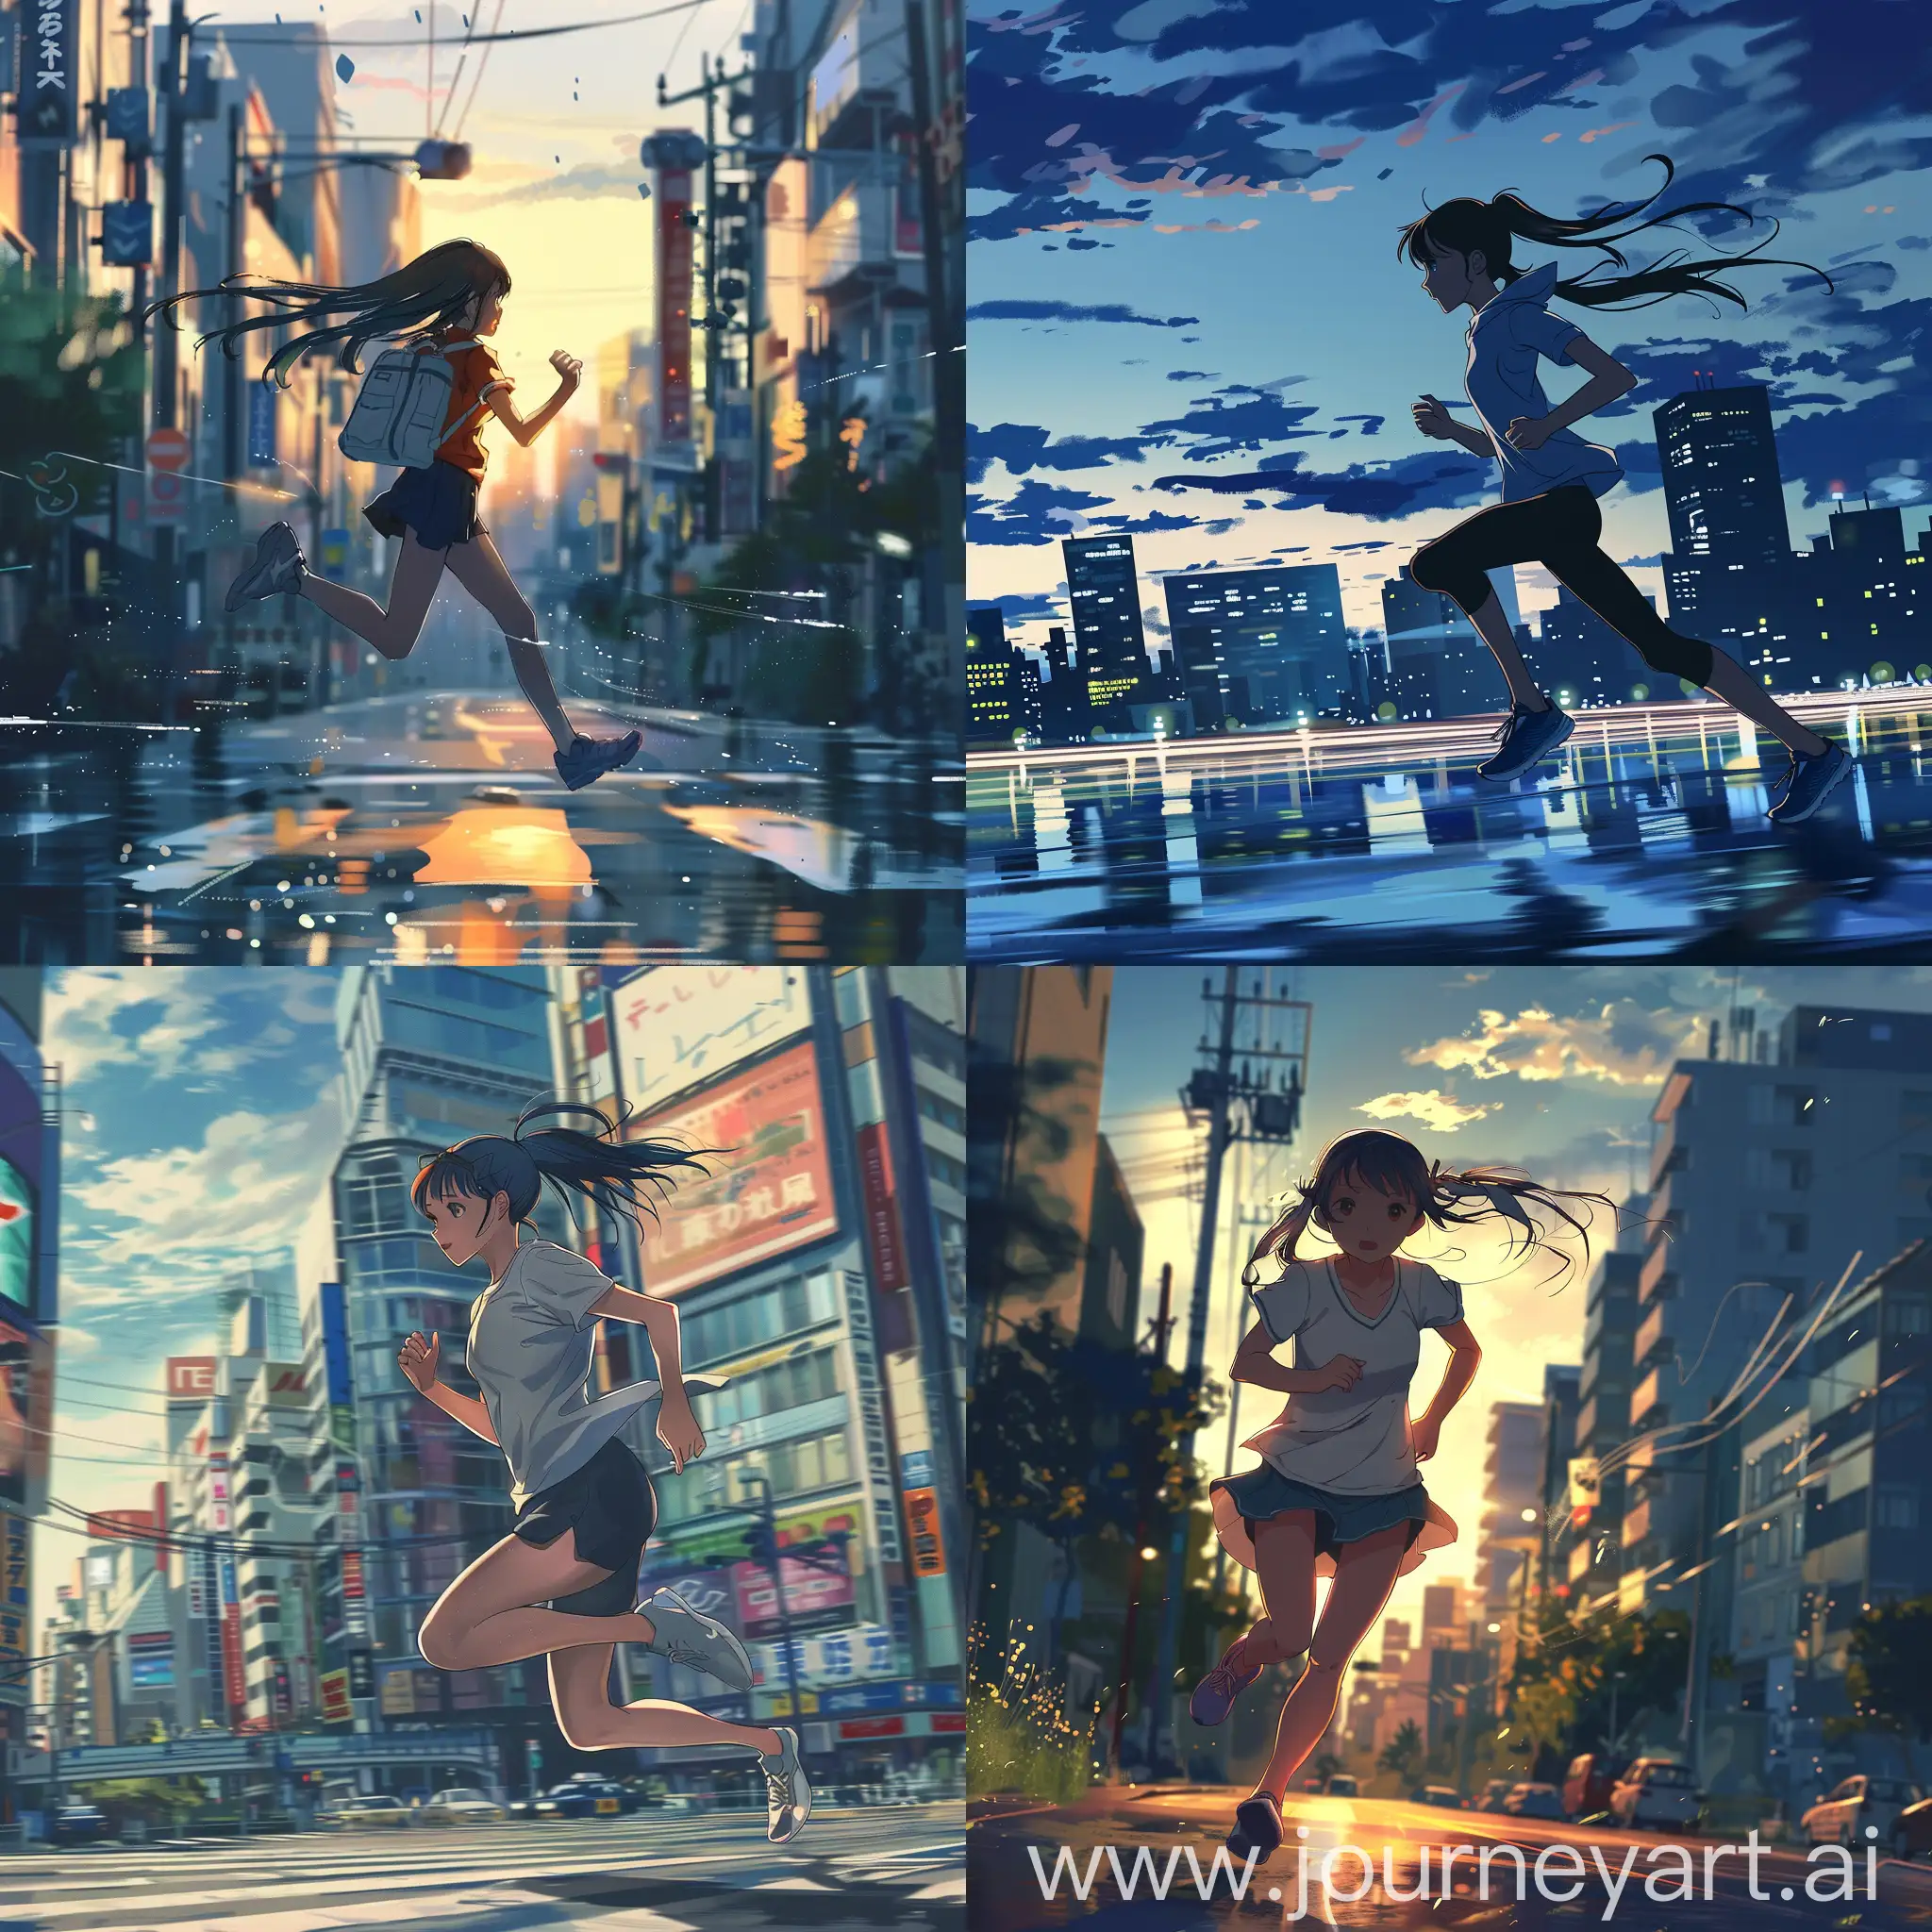 One Girl is run, background is City. Japan Anime Style.